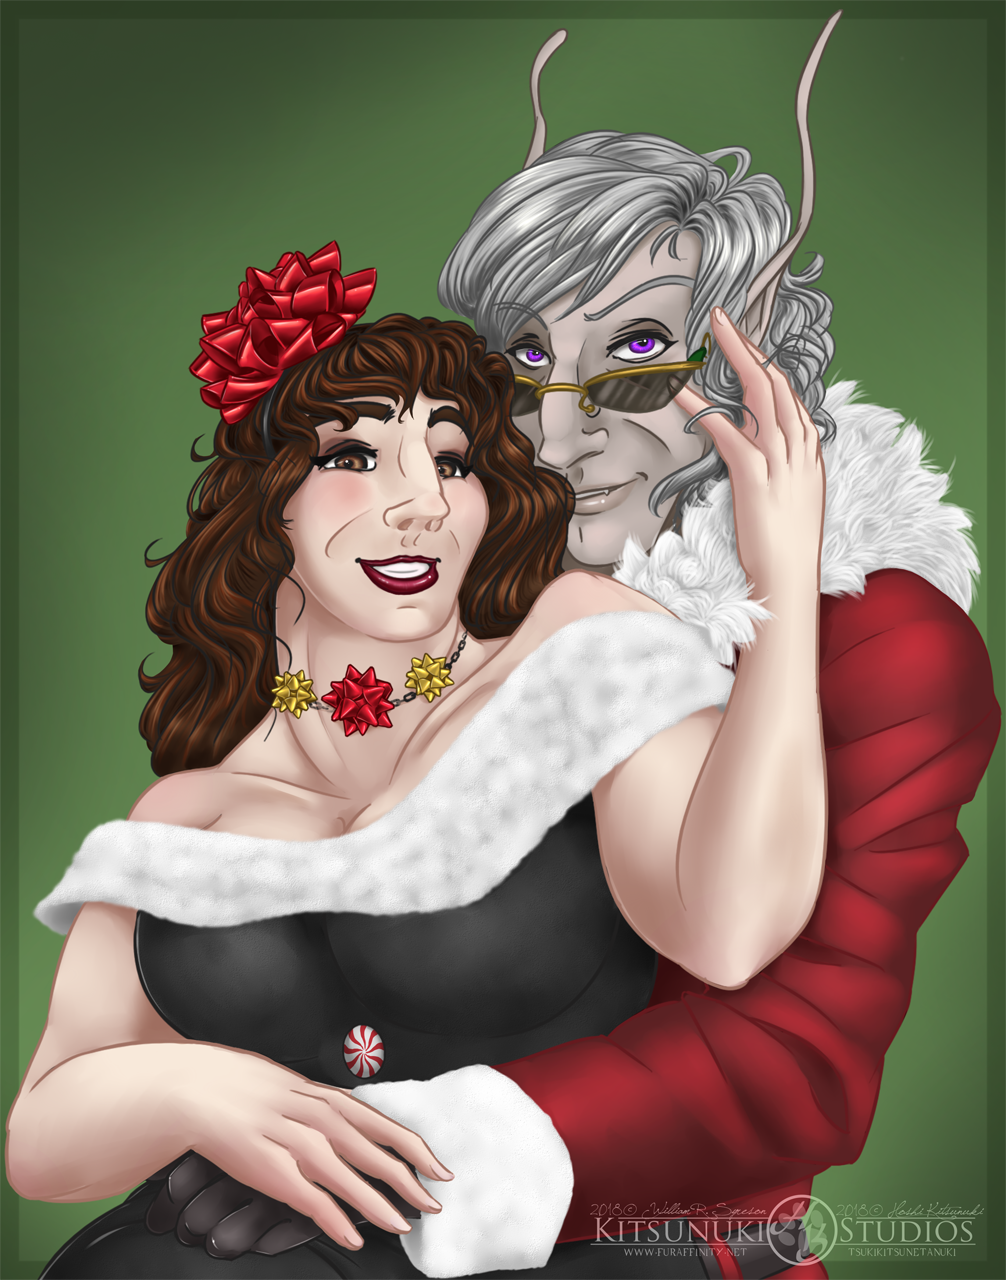 ~ The Peppermint Princess and the King ~